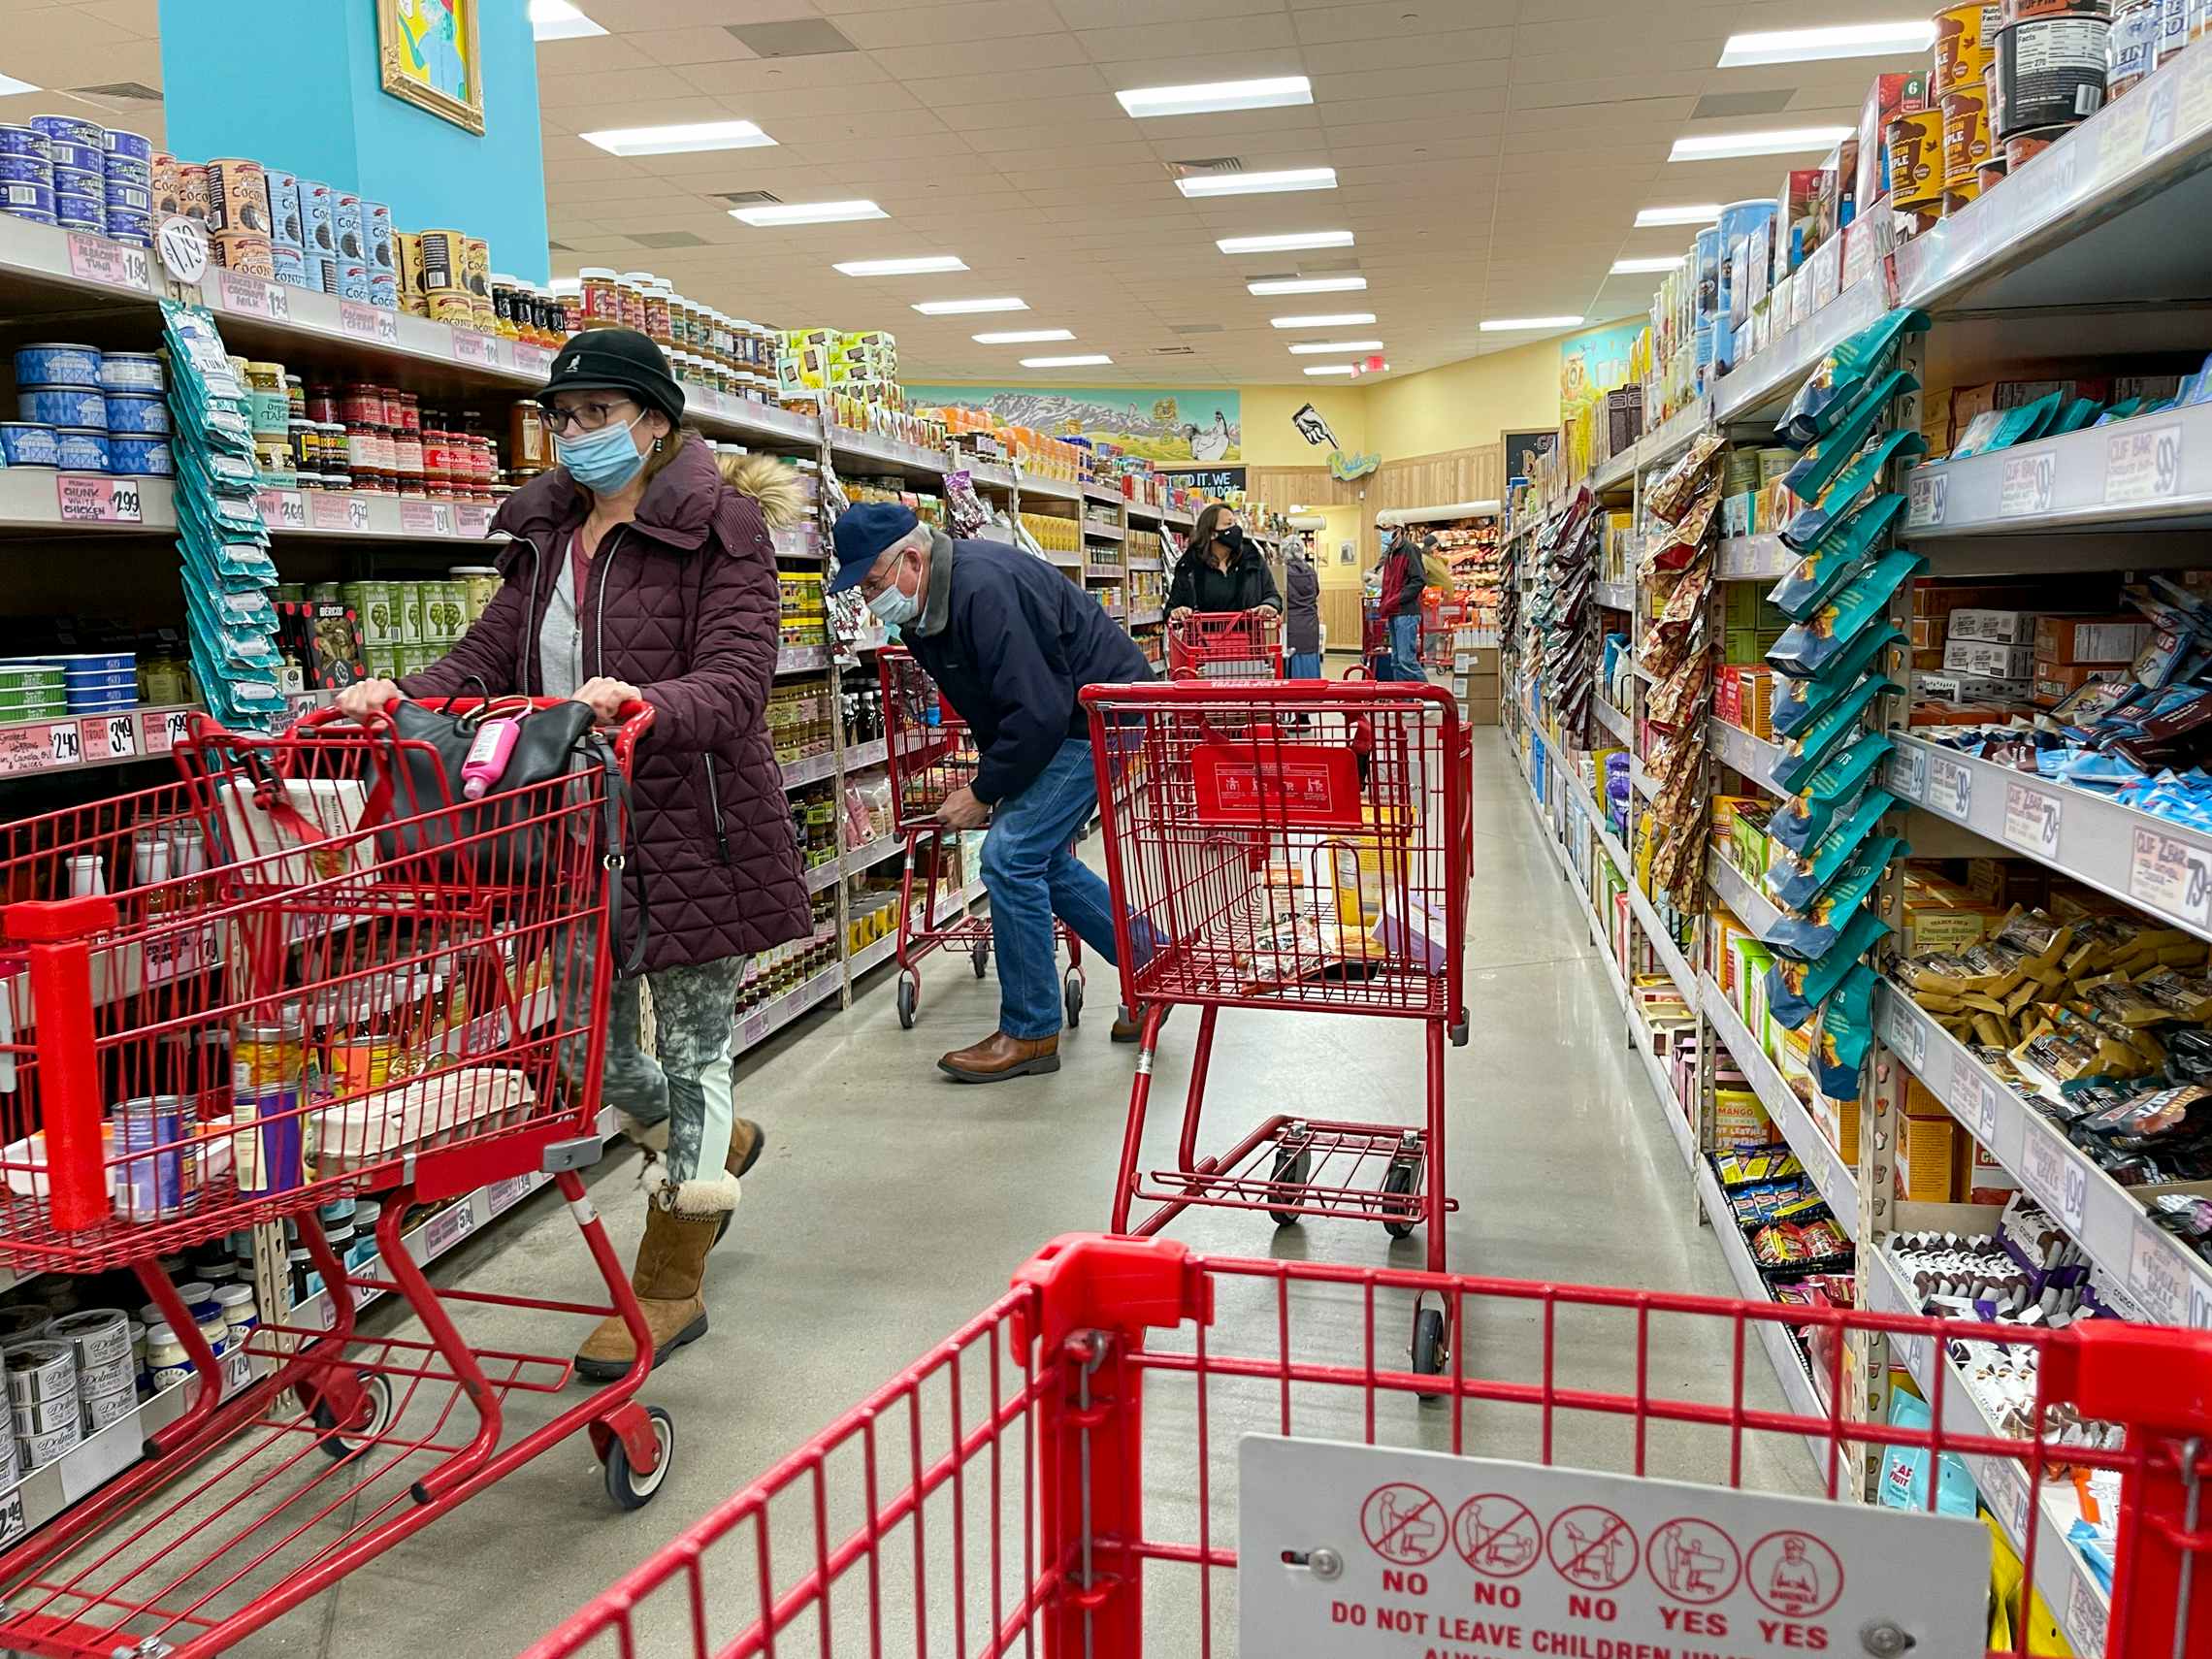 Customers in a busy shopping aisle inside Trader Joe's.